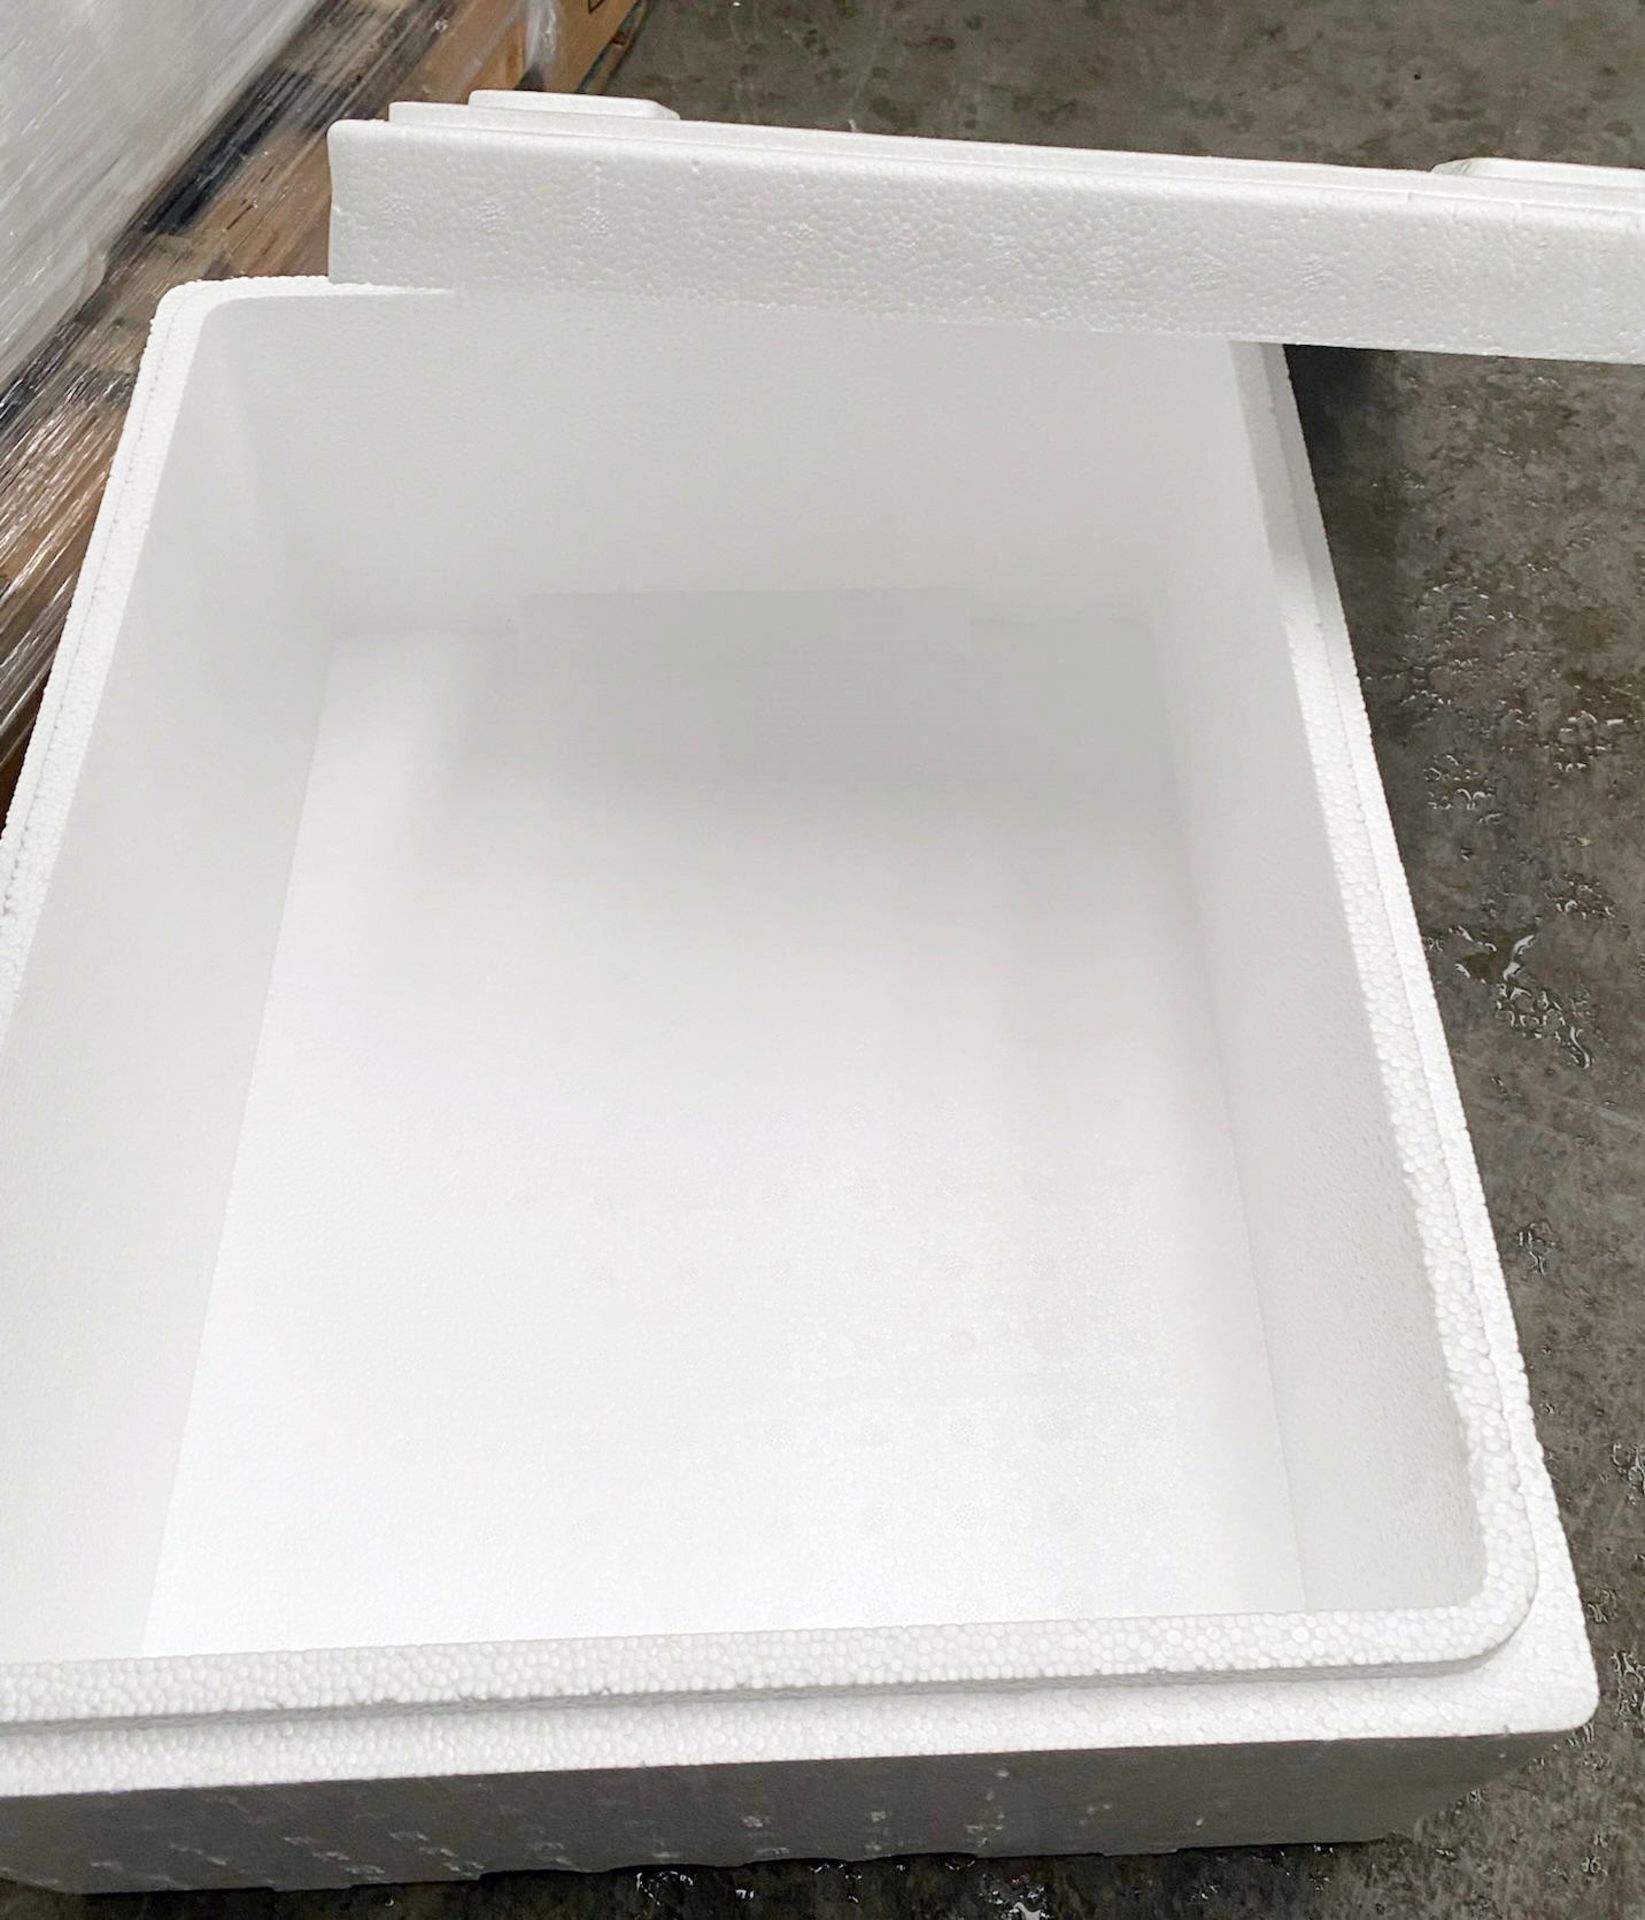 1 x Pallet of Polystyrene Insulated Food Delivery Boxes With Lids - Image 2 of 2